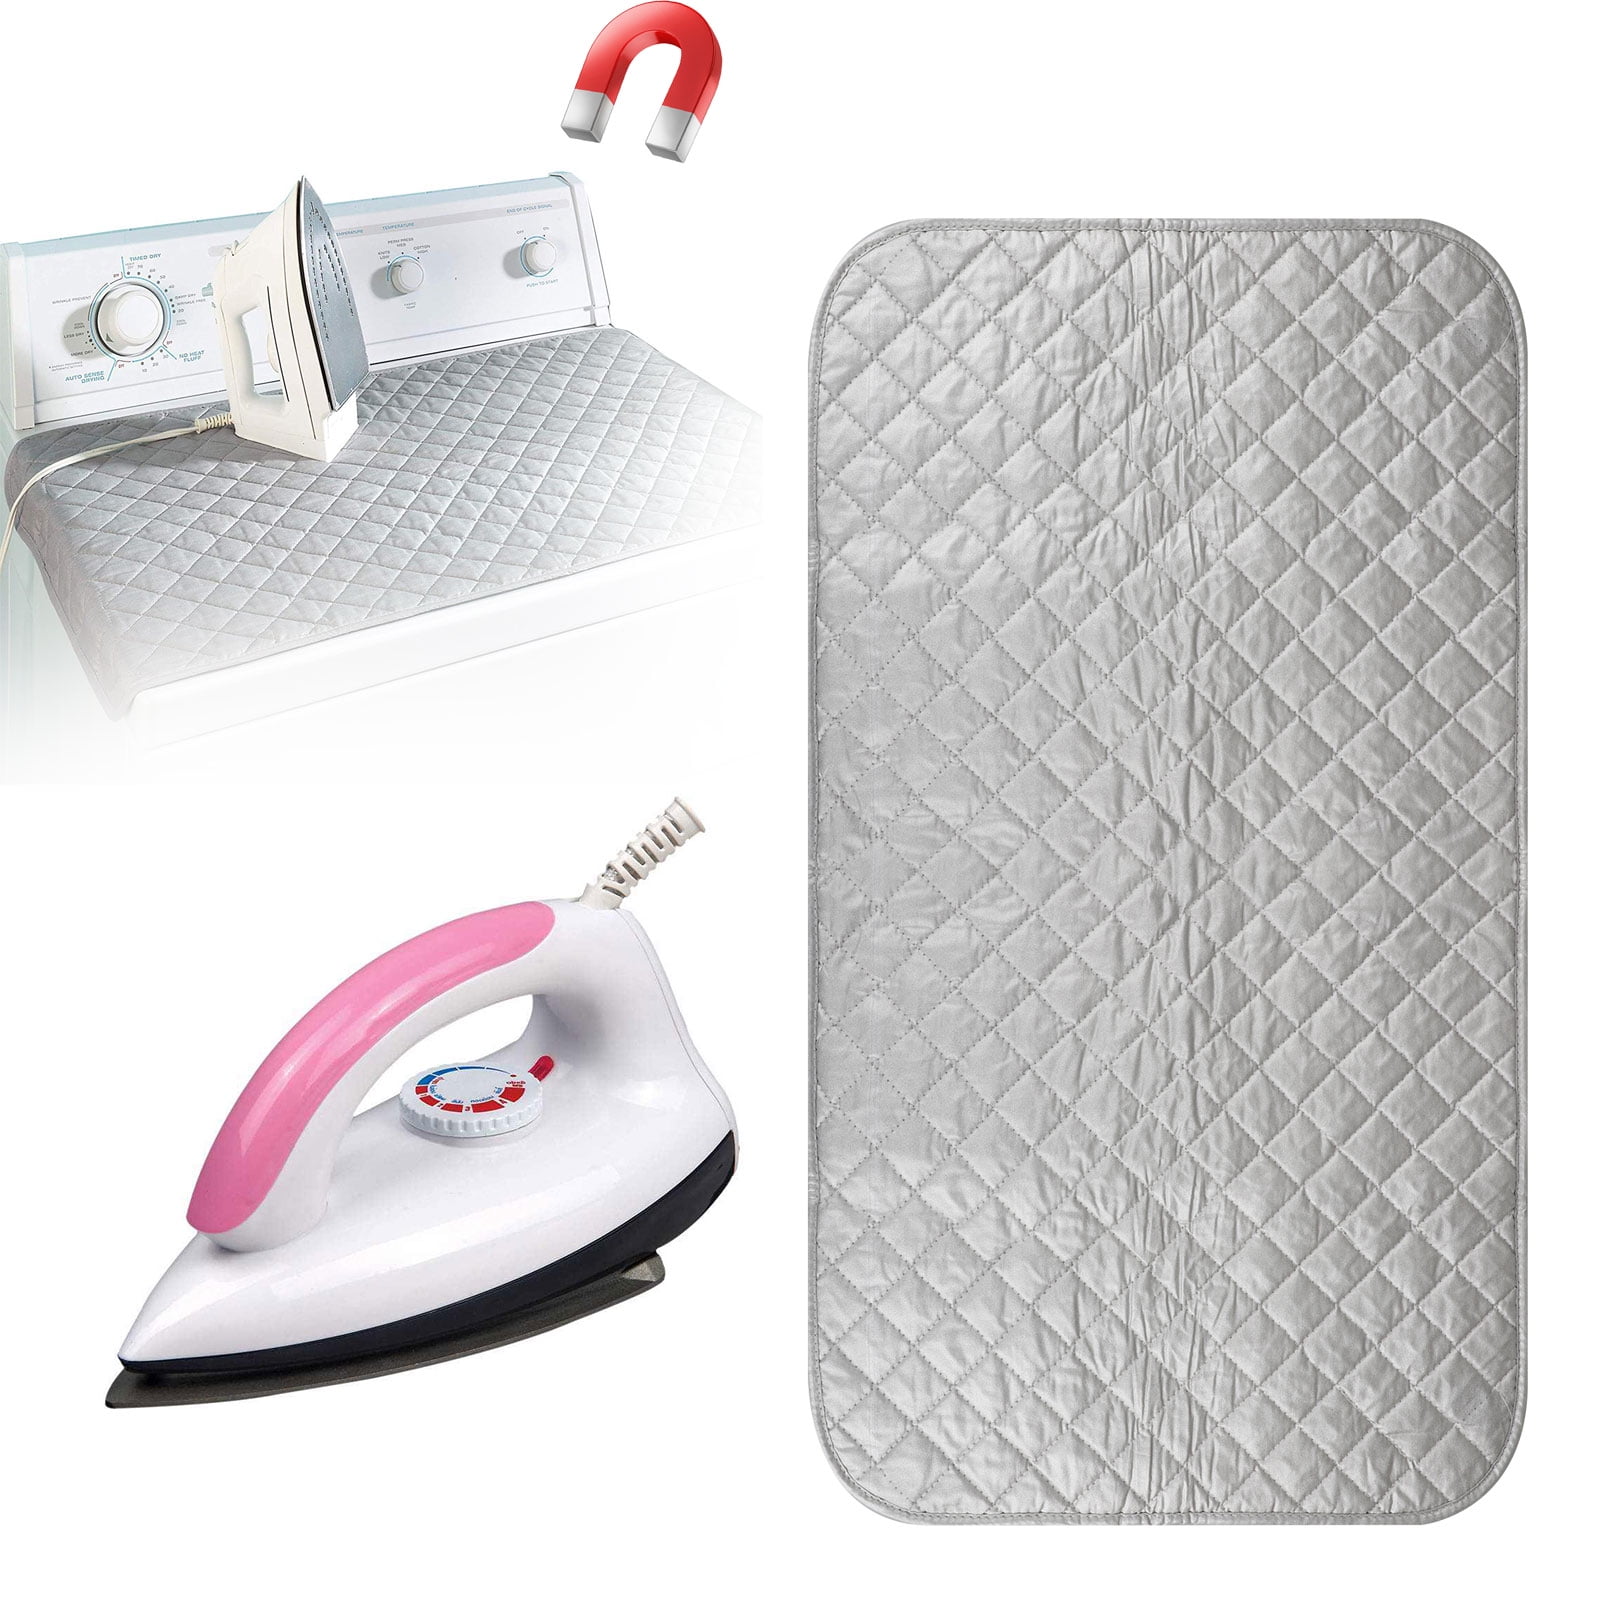 Room Essentials Foldable Ironing Pad  For Flat Surfaces 